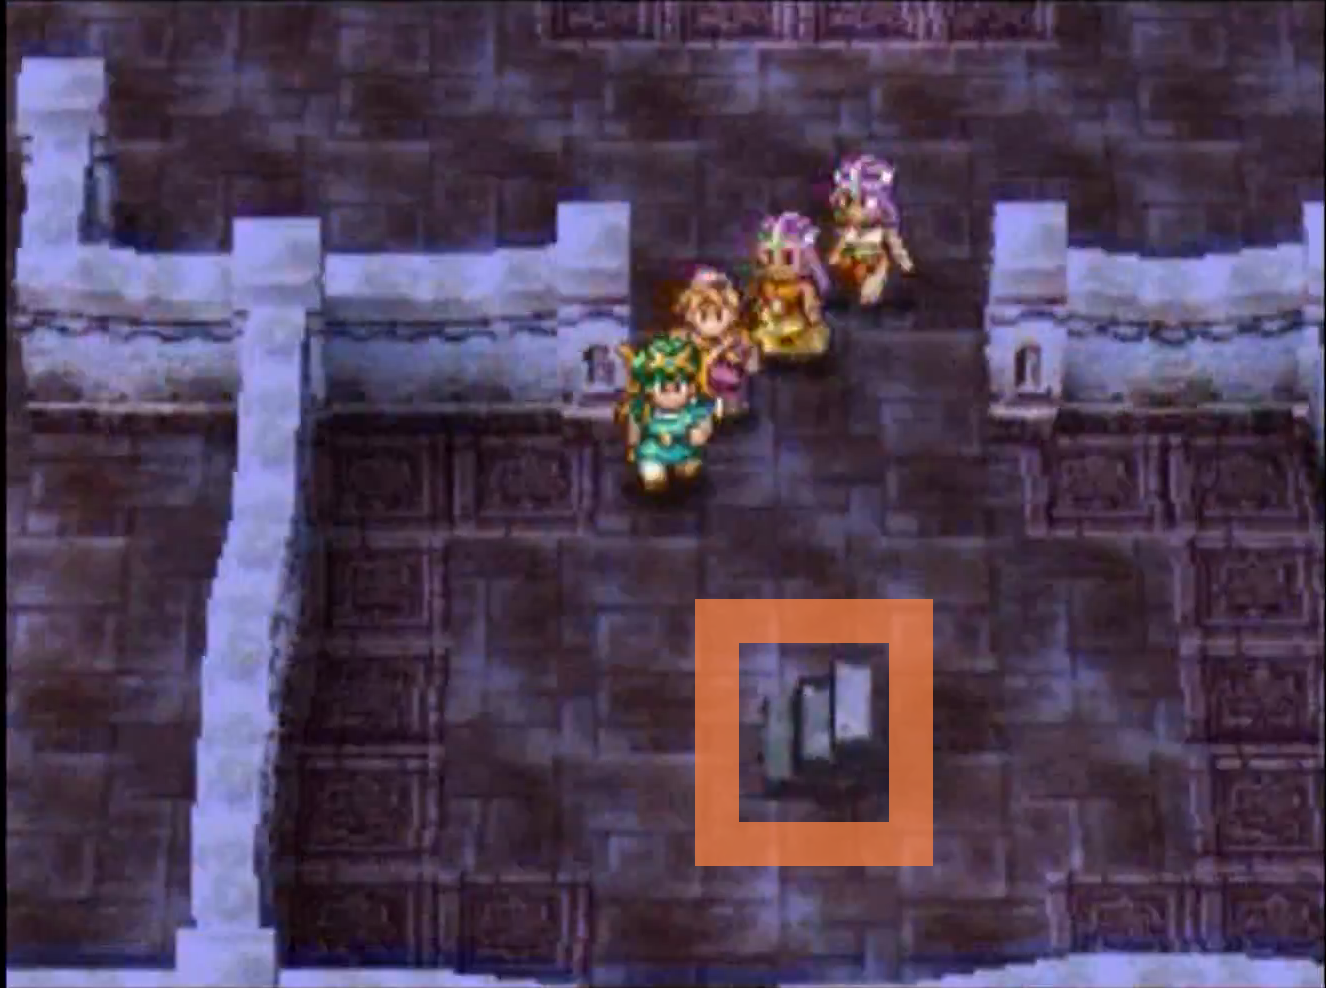 Find both chests and then go up to the next floor (7) | Dragon Quest IV